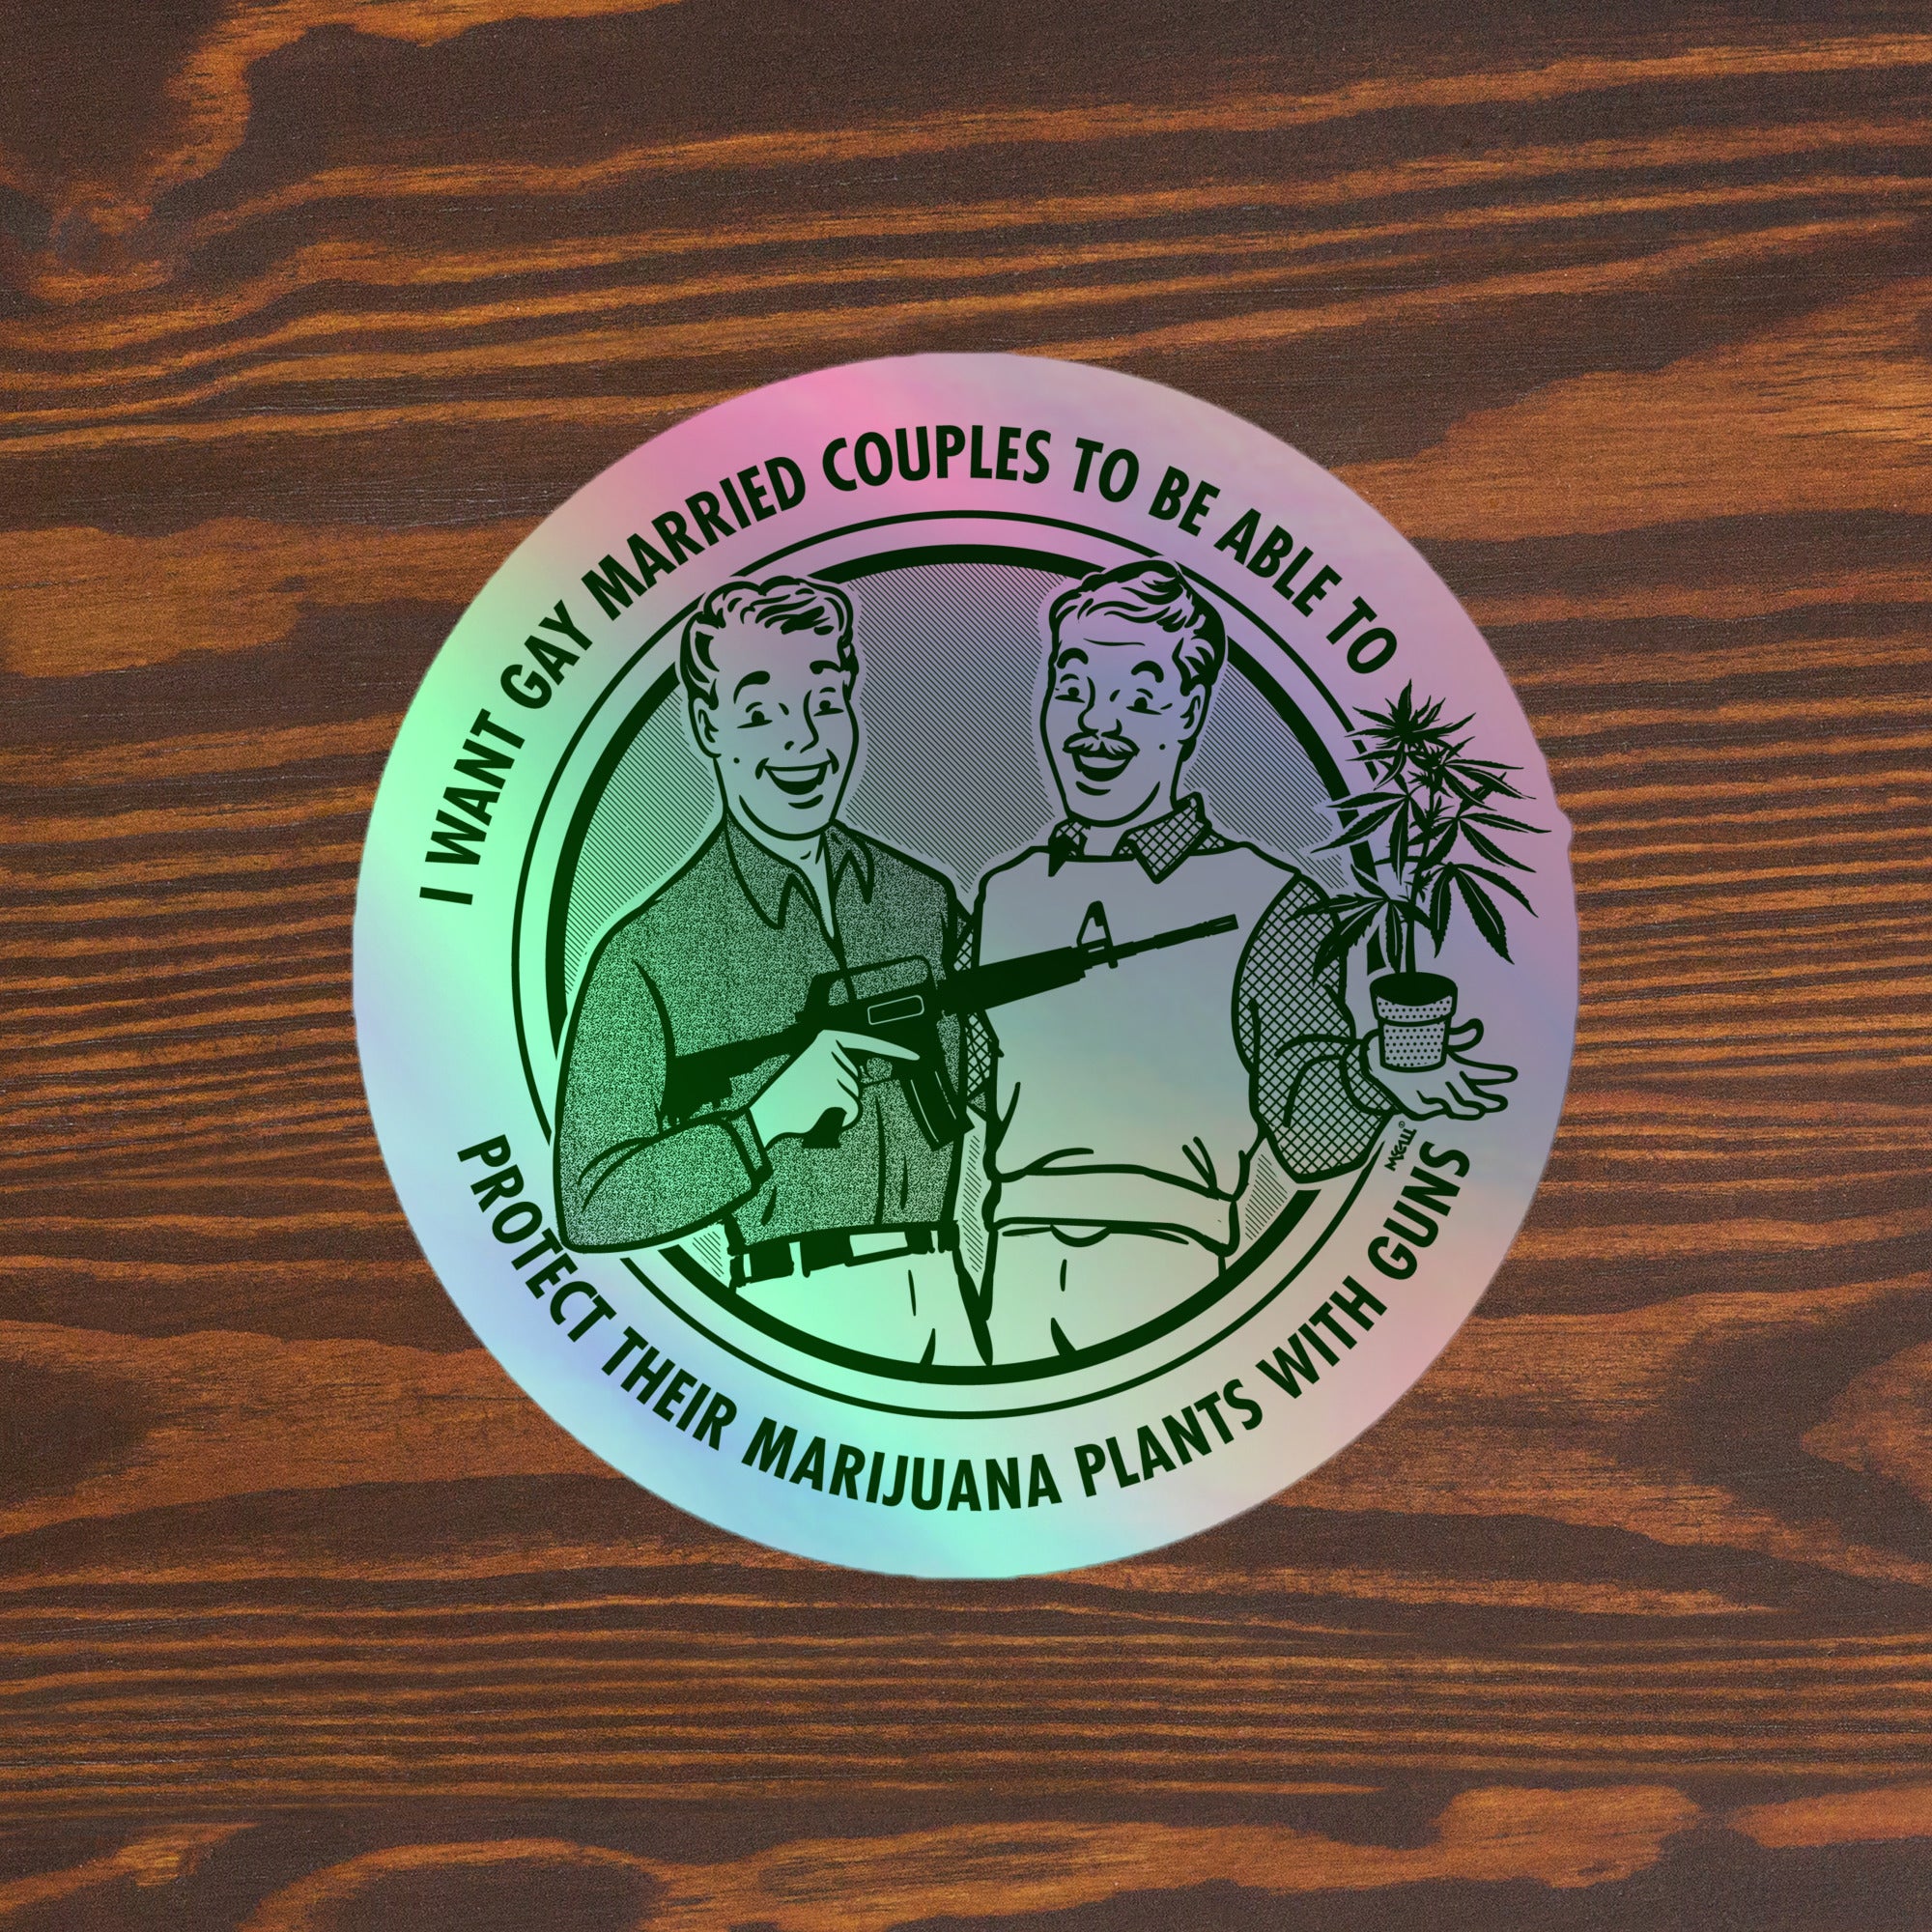 I Want Gay Married Couples To Be Able To Protect Their Marijuana Plants With Guns Holographic  Sticker